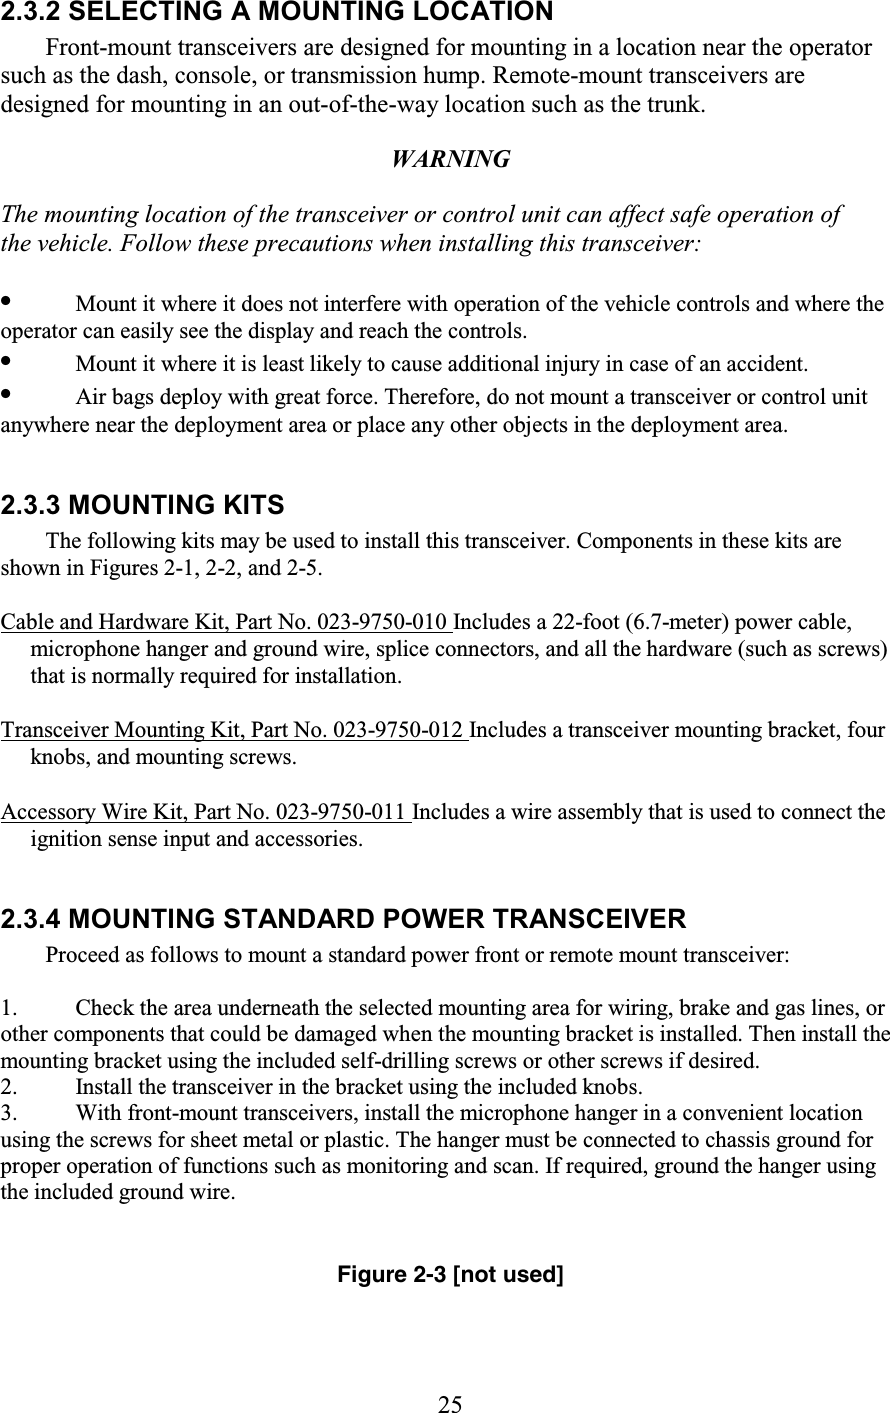 25 2.3.2 SELECTING A MOUNTING LOCATION Front-mount transceivers are designed for mounting in a location near the operator such as the dash, console, or transmission hump. Remote-mount transceivers are designed for mounting in an out-of-the-way location such as the trunk.  WARNING  The mounting location of the transceiver or control unit can affect safe operation of the vehicle. Follow these precautions when installing this transceiver:  •  Mount it where it does not interfere with operation of the vehicle controls and where the operator can easily see the display and reach the controls.  •  Mount it where it is least likely to cause additional injury in case of an accident.  •  Air bags deploy with great force. Therefore, do not mount a transceiver or control unit anywhere near the deployment area or place any other objects in the deployment area.   2.3.3 MOUNTING KITS  The following kits may be used to install this transceiver. Components in these kits are shown in Figures 2-1, 2-2, and 2-5.  Cable and Hardware Kit, Part No. 023-9750-010 Includes a 22-foot (6.7-meter) power cable, microphone hanger and ground wire, splice connectors, and all the hardware (such as screws) that is normally required for installation.  Transceiver Mounting Kit, Part No. 023-9750-012 Includes a transceiver mounting bracket, four knobs, and mounting screws.  Accessory Wire Kit, Part No. 023-9750-011 Includes a wire assembly that is used to connect the ignition sense input and accessories.   2.3.4 MOUNTING STANDARD POWER TRANSCEIVER  Proceed as follows to mount a standard power front or remote mount transceiver:  1. Check the area underneath the selected mounting area for wiring, brake and gas lines, or other components that could be damaged when the mounting bracket is installed. Then install the mounting bracket using the included self-drilling screws or other screws if desired.  2. Install the transceiver in the bracket using the included knobs.  3. With front-mount transceivers, install the microphone hanger in a convenient location using the screws for sheet metal or plastic. The hanger must be connected to chassis ground for proper operation of functions such as monitoring and scan. If required, ground the hanger using the included ground wire.    Figure 2-3 [not used]  